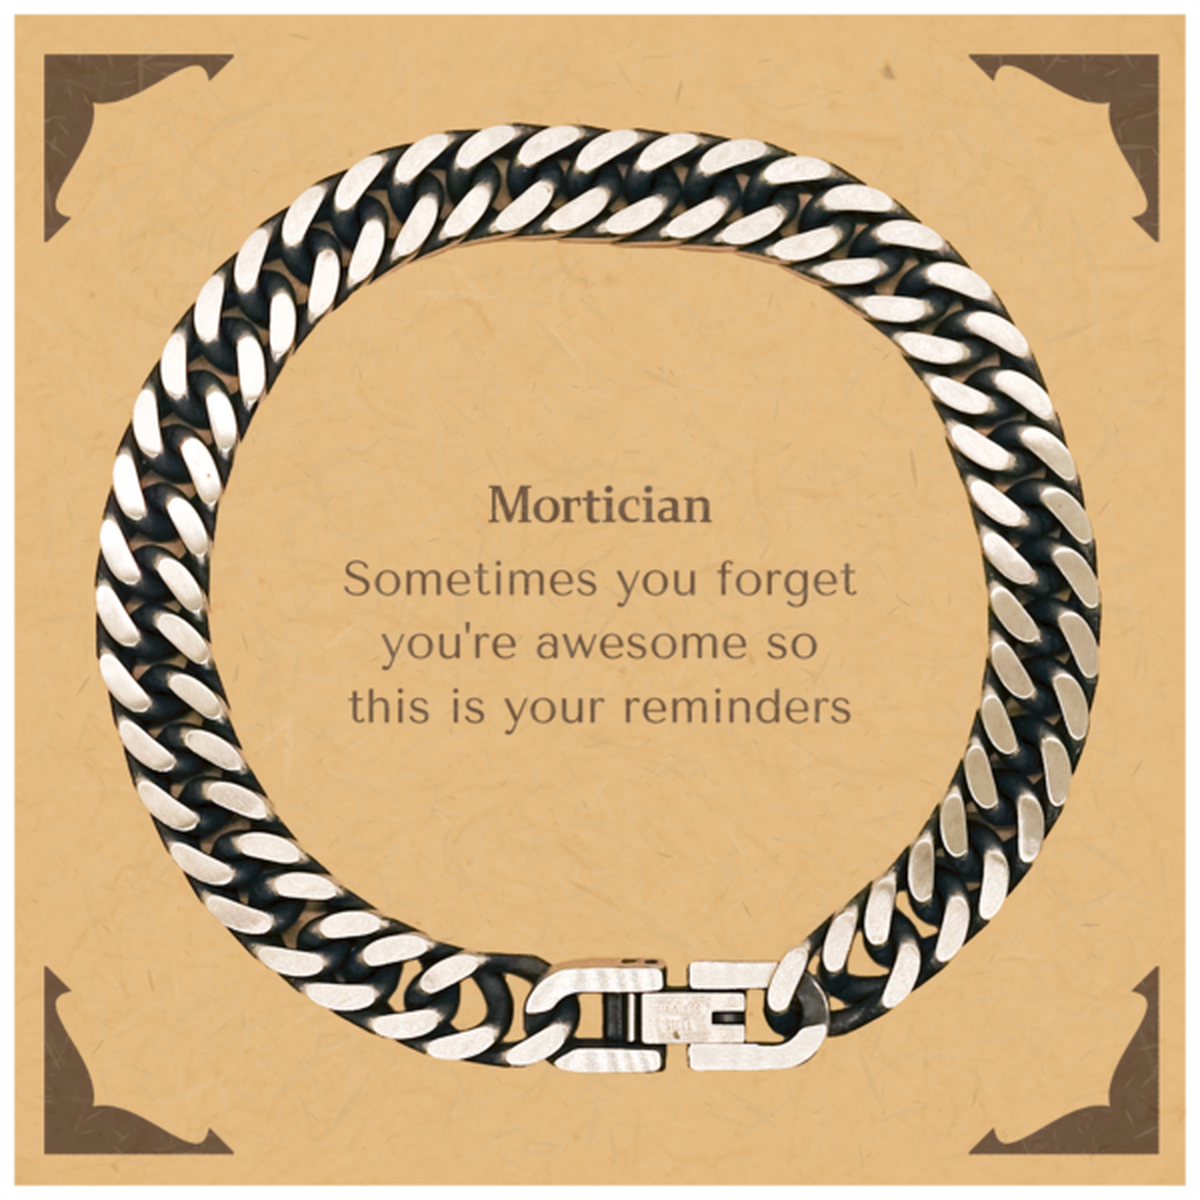 Sentimental Mortician Cuban Link Chain Bracelet, Mortician Sometimes you forget you're awesome so this is your reminders, Graduation Christmas Birthday Gifts for Mortician, Men, Women, Coworkers